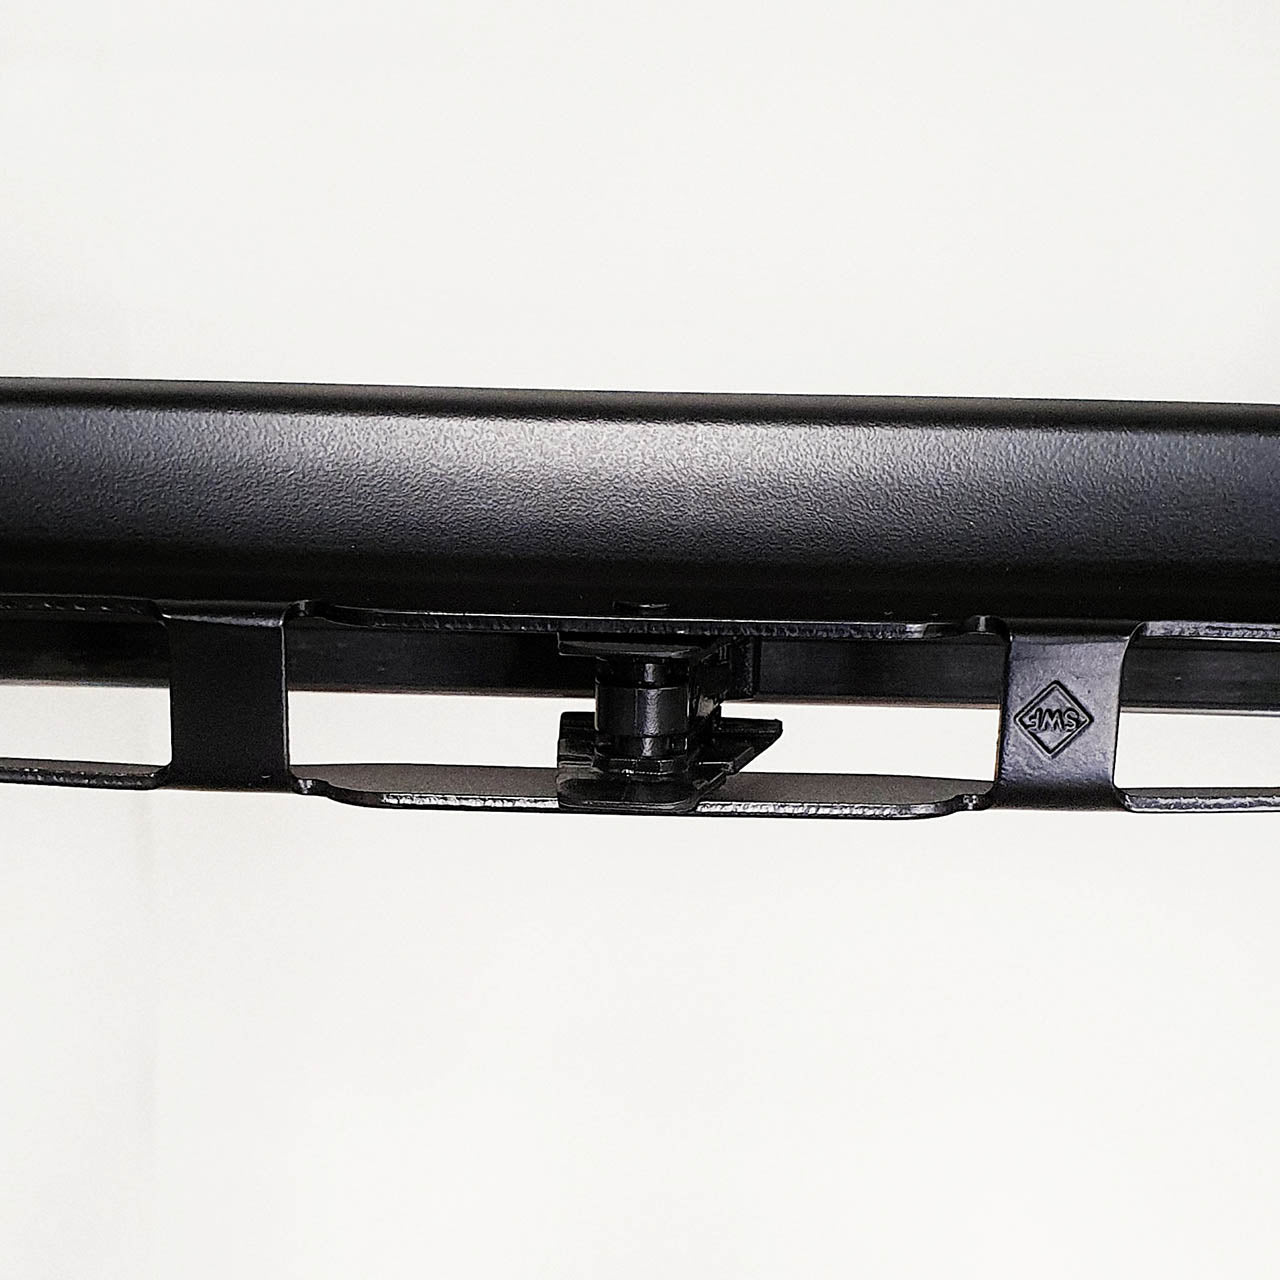 Genuine Mercedes-Benz G Class front wiper blades for 461 and 463 models